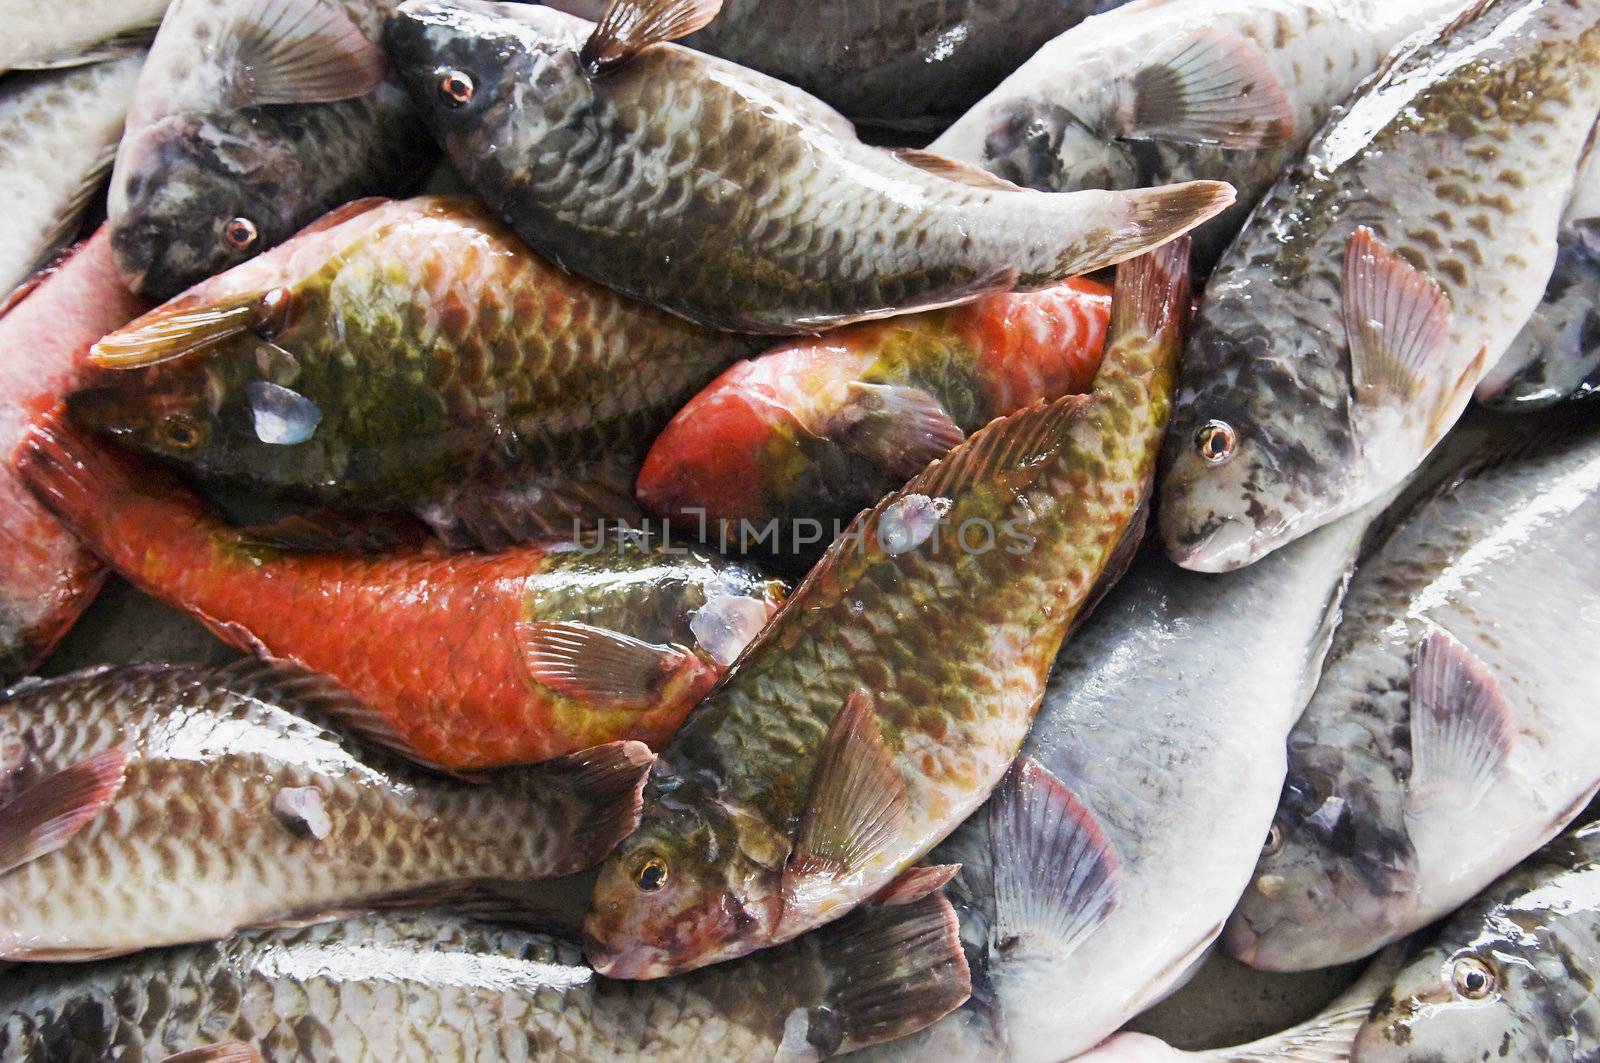 Parrotfish in the market by mrfotos